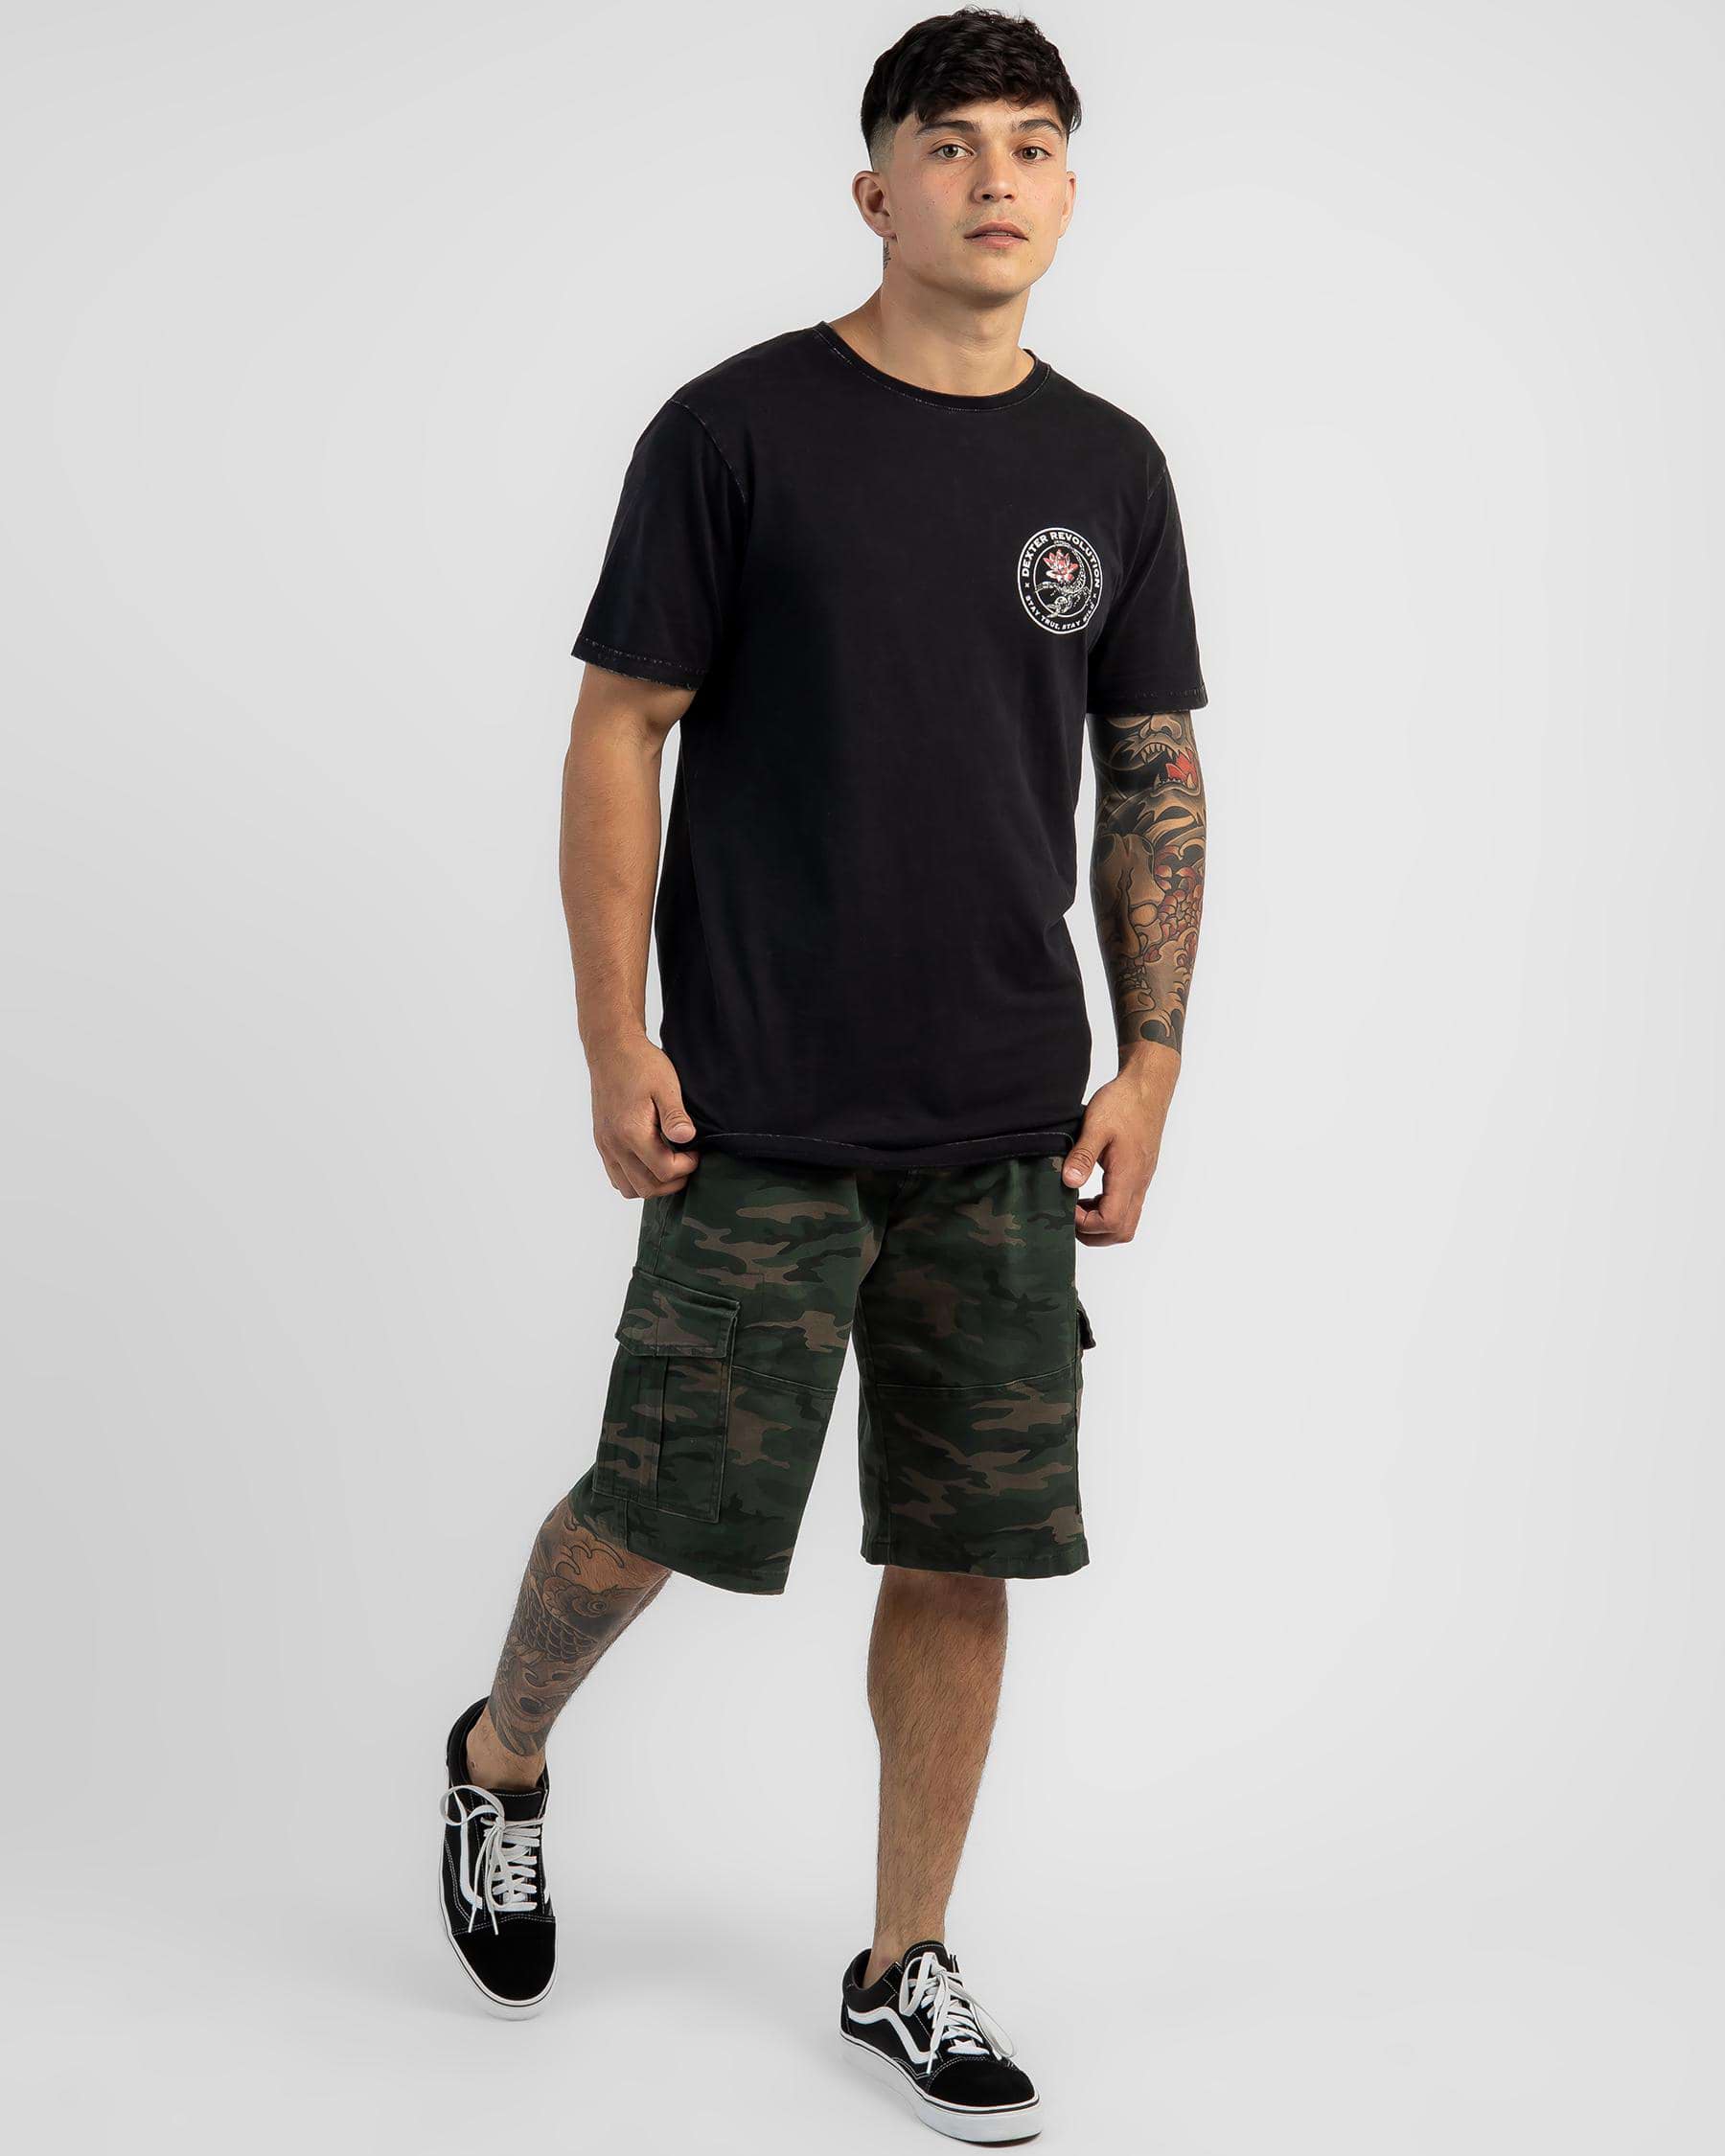 Dexter Vinicate Cargo Shorts In Green Camo - Fast Shipping & Easy ...